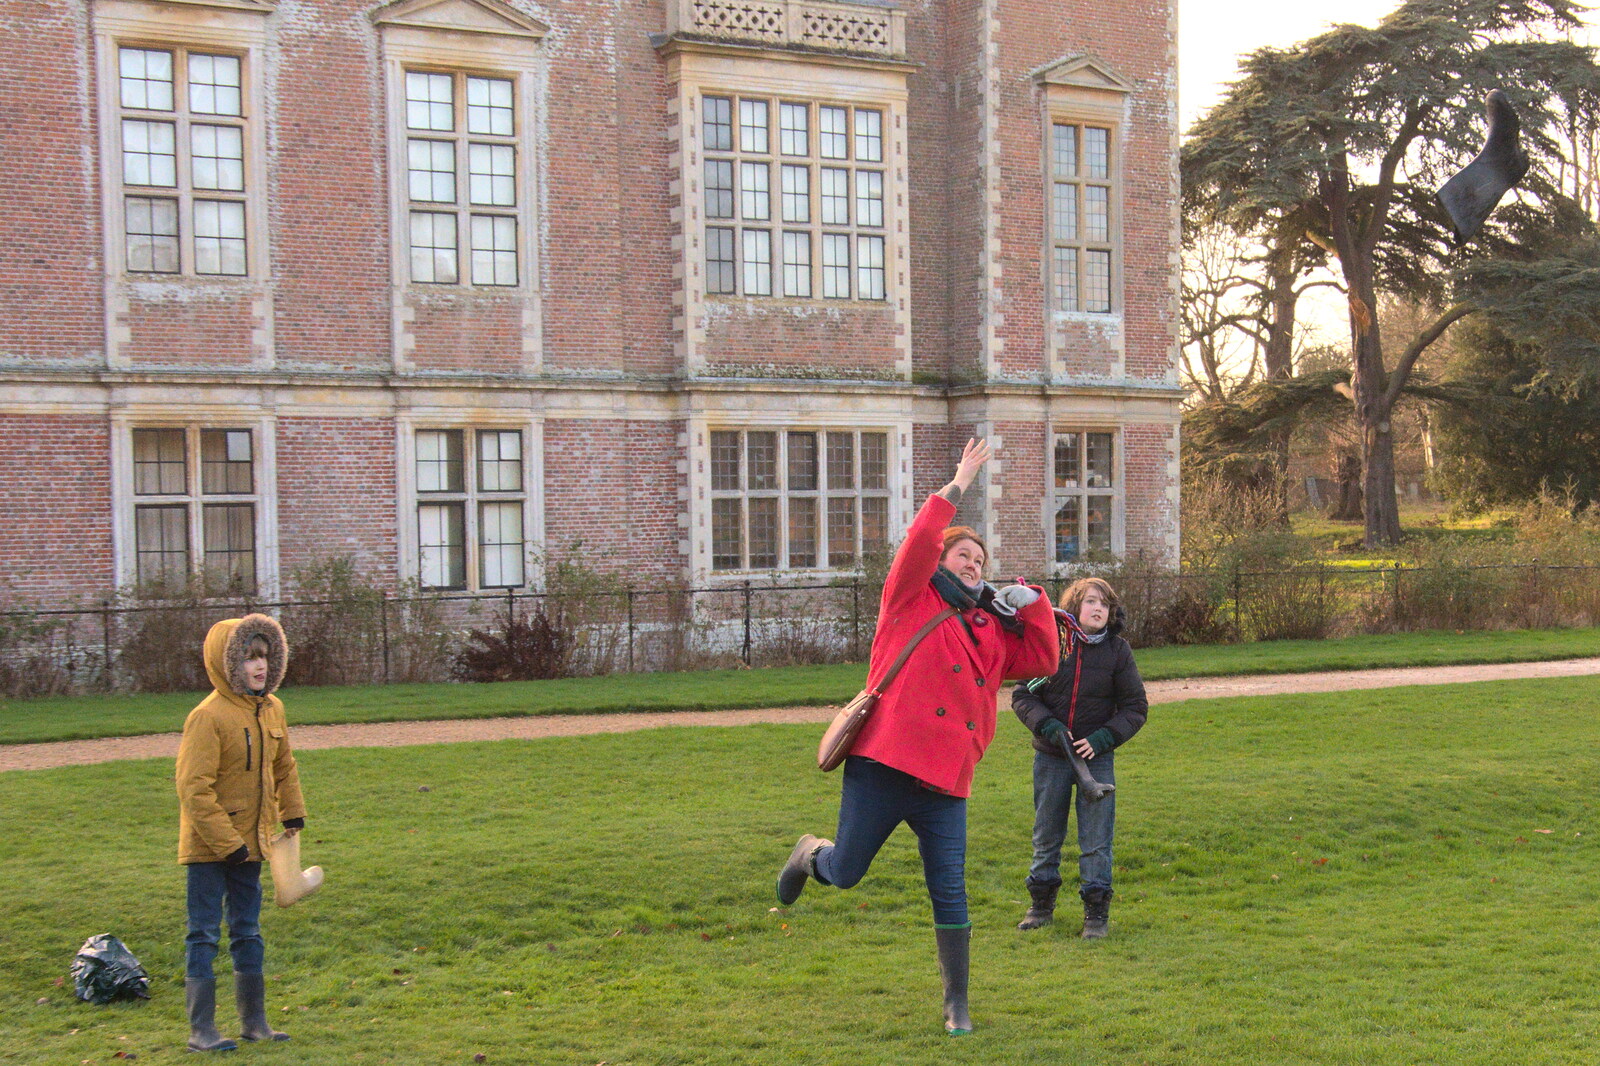 Isobel does Welly Wanging from A Visit to Blickling Hall, Aylsham, Norfolk - 9th January 2022